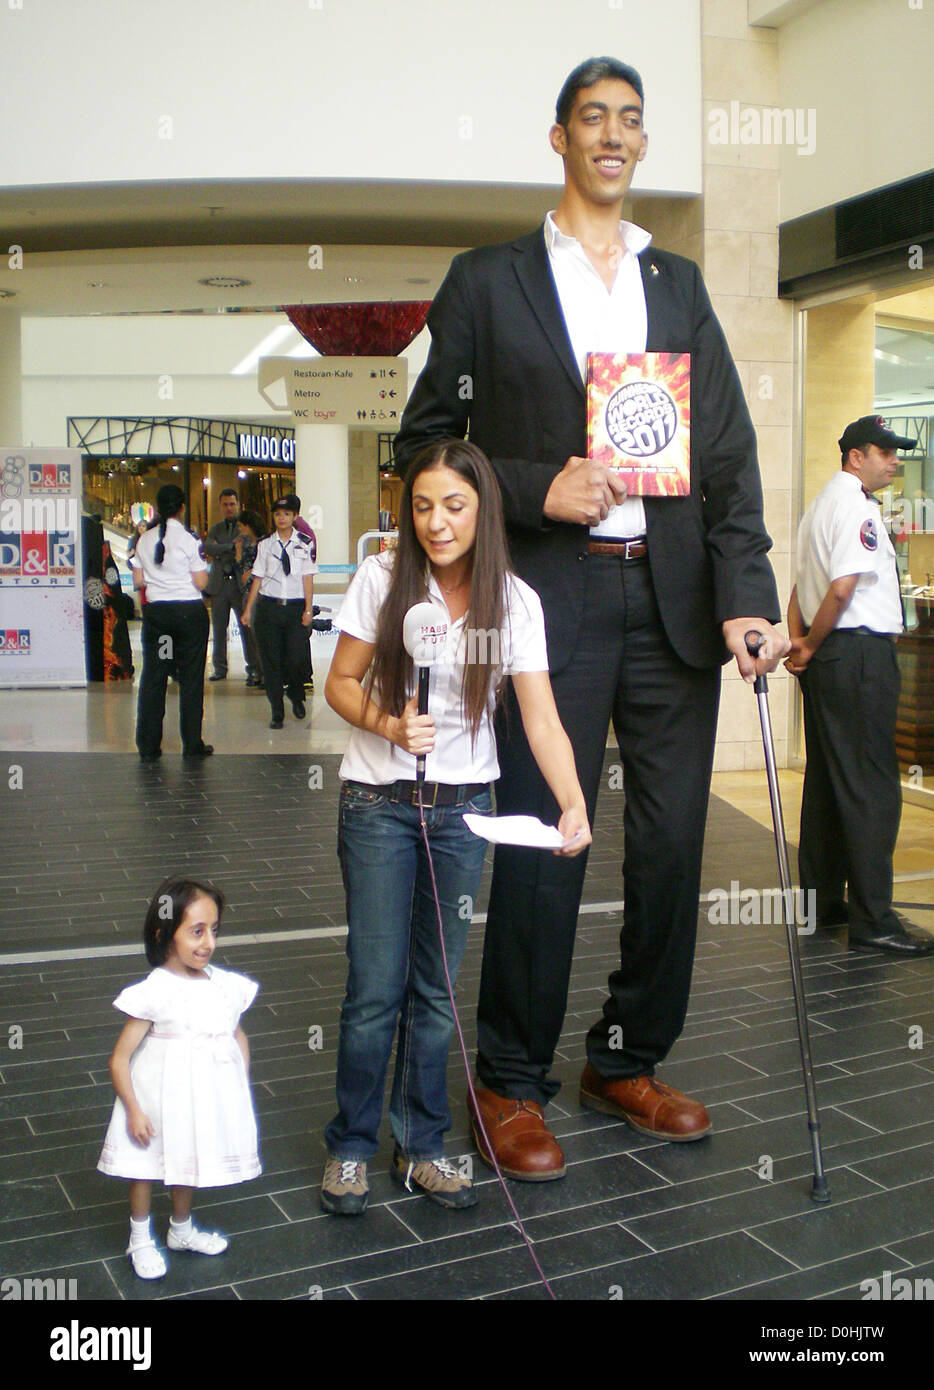 the tallest woman and man in the world